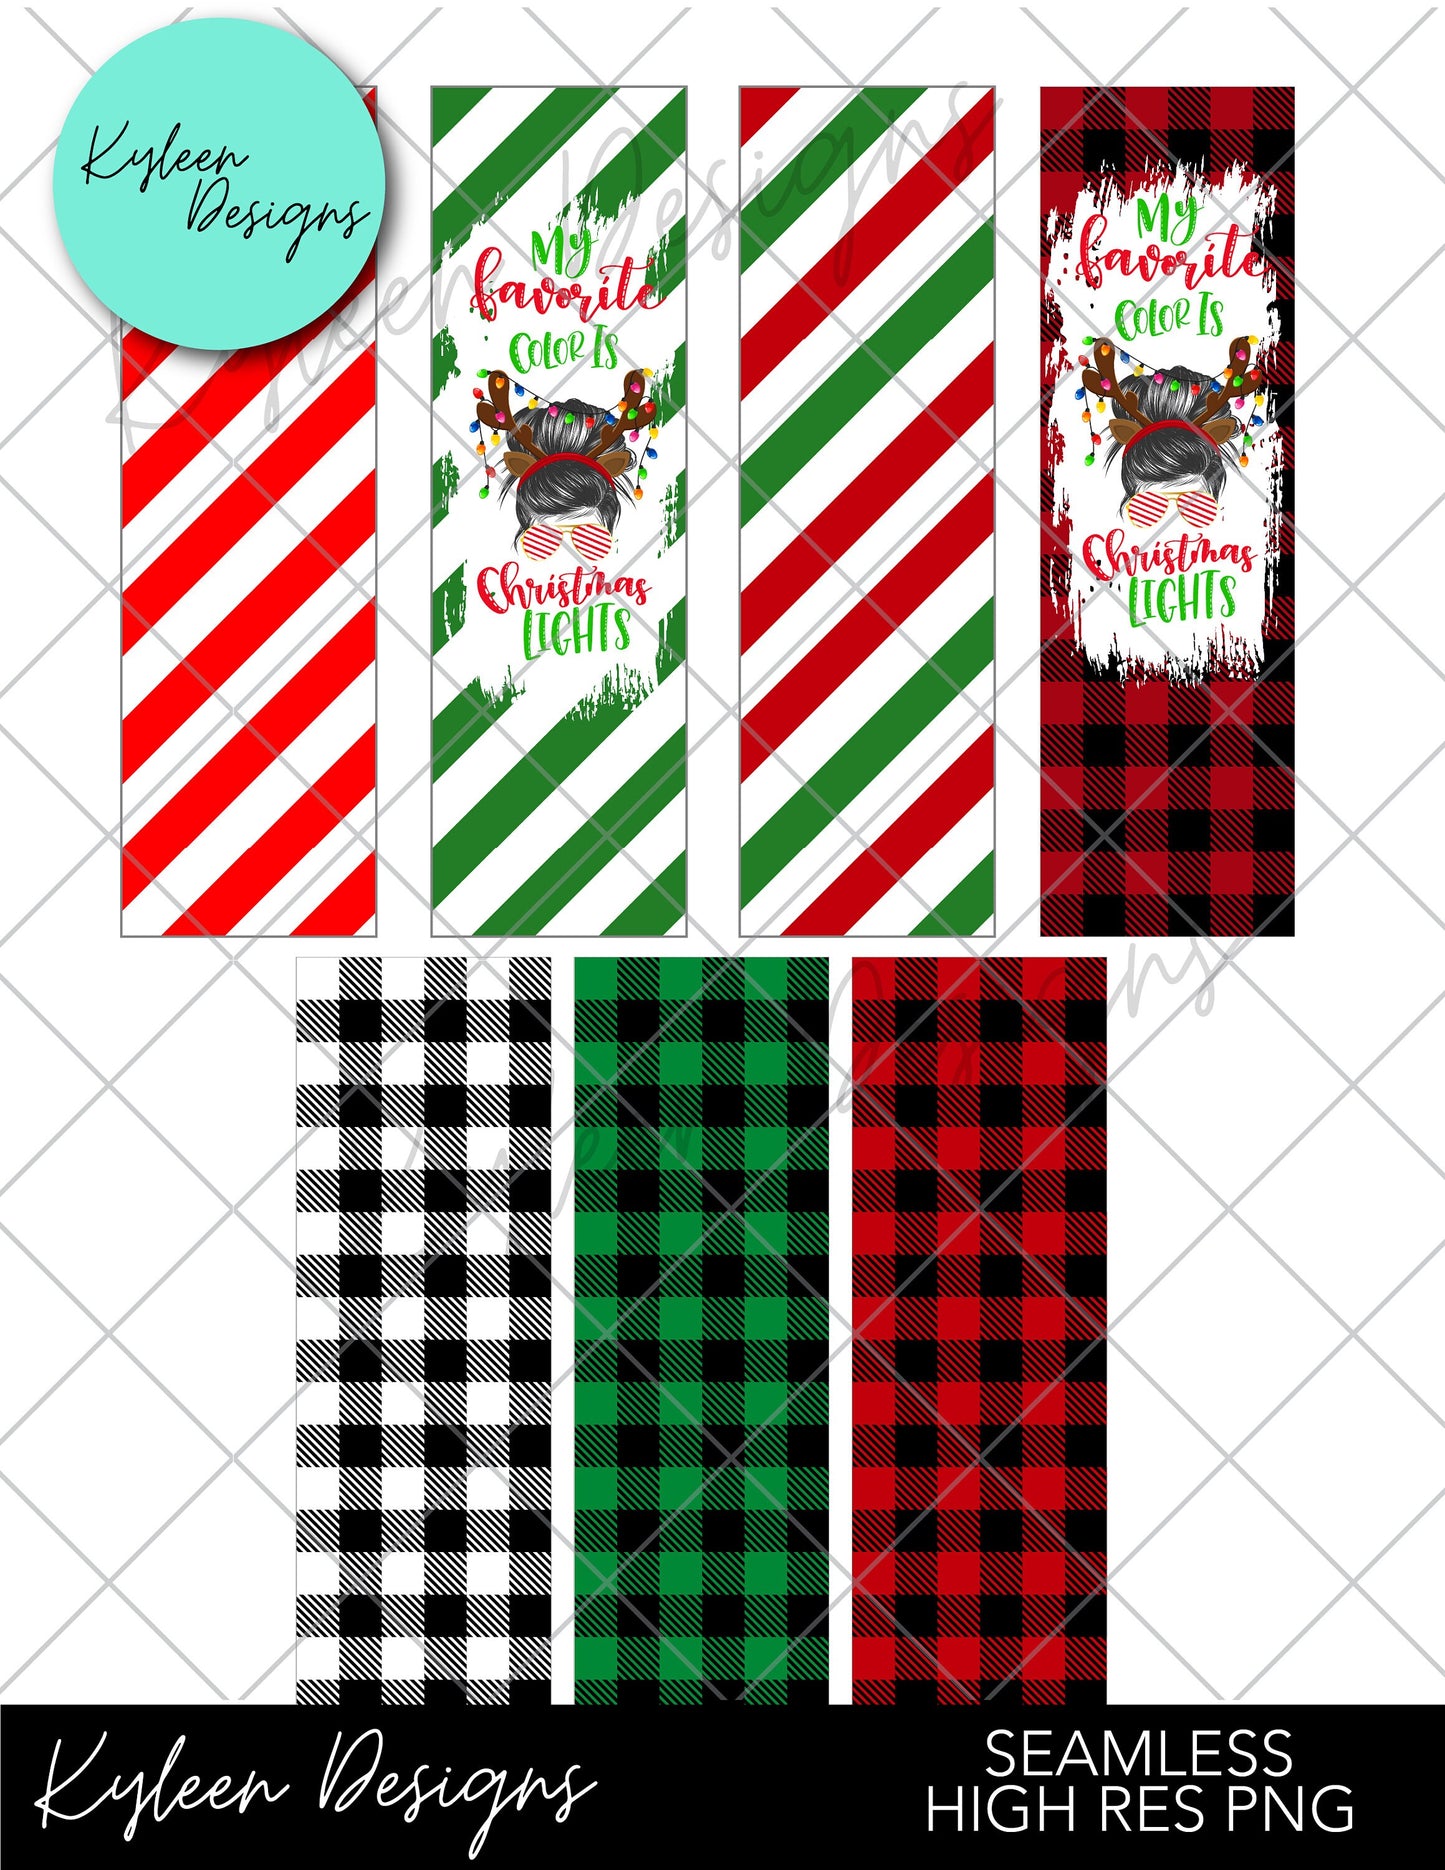 Messy Bun Antlers Pen Wraps for Waterslide, Sublimation or Vinyl High RES PNG SEAMLESS